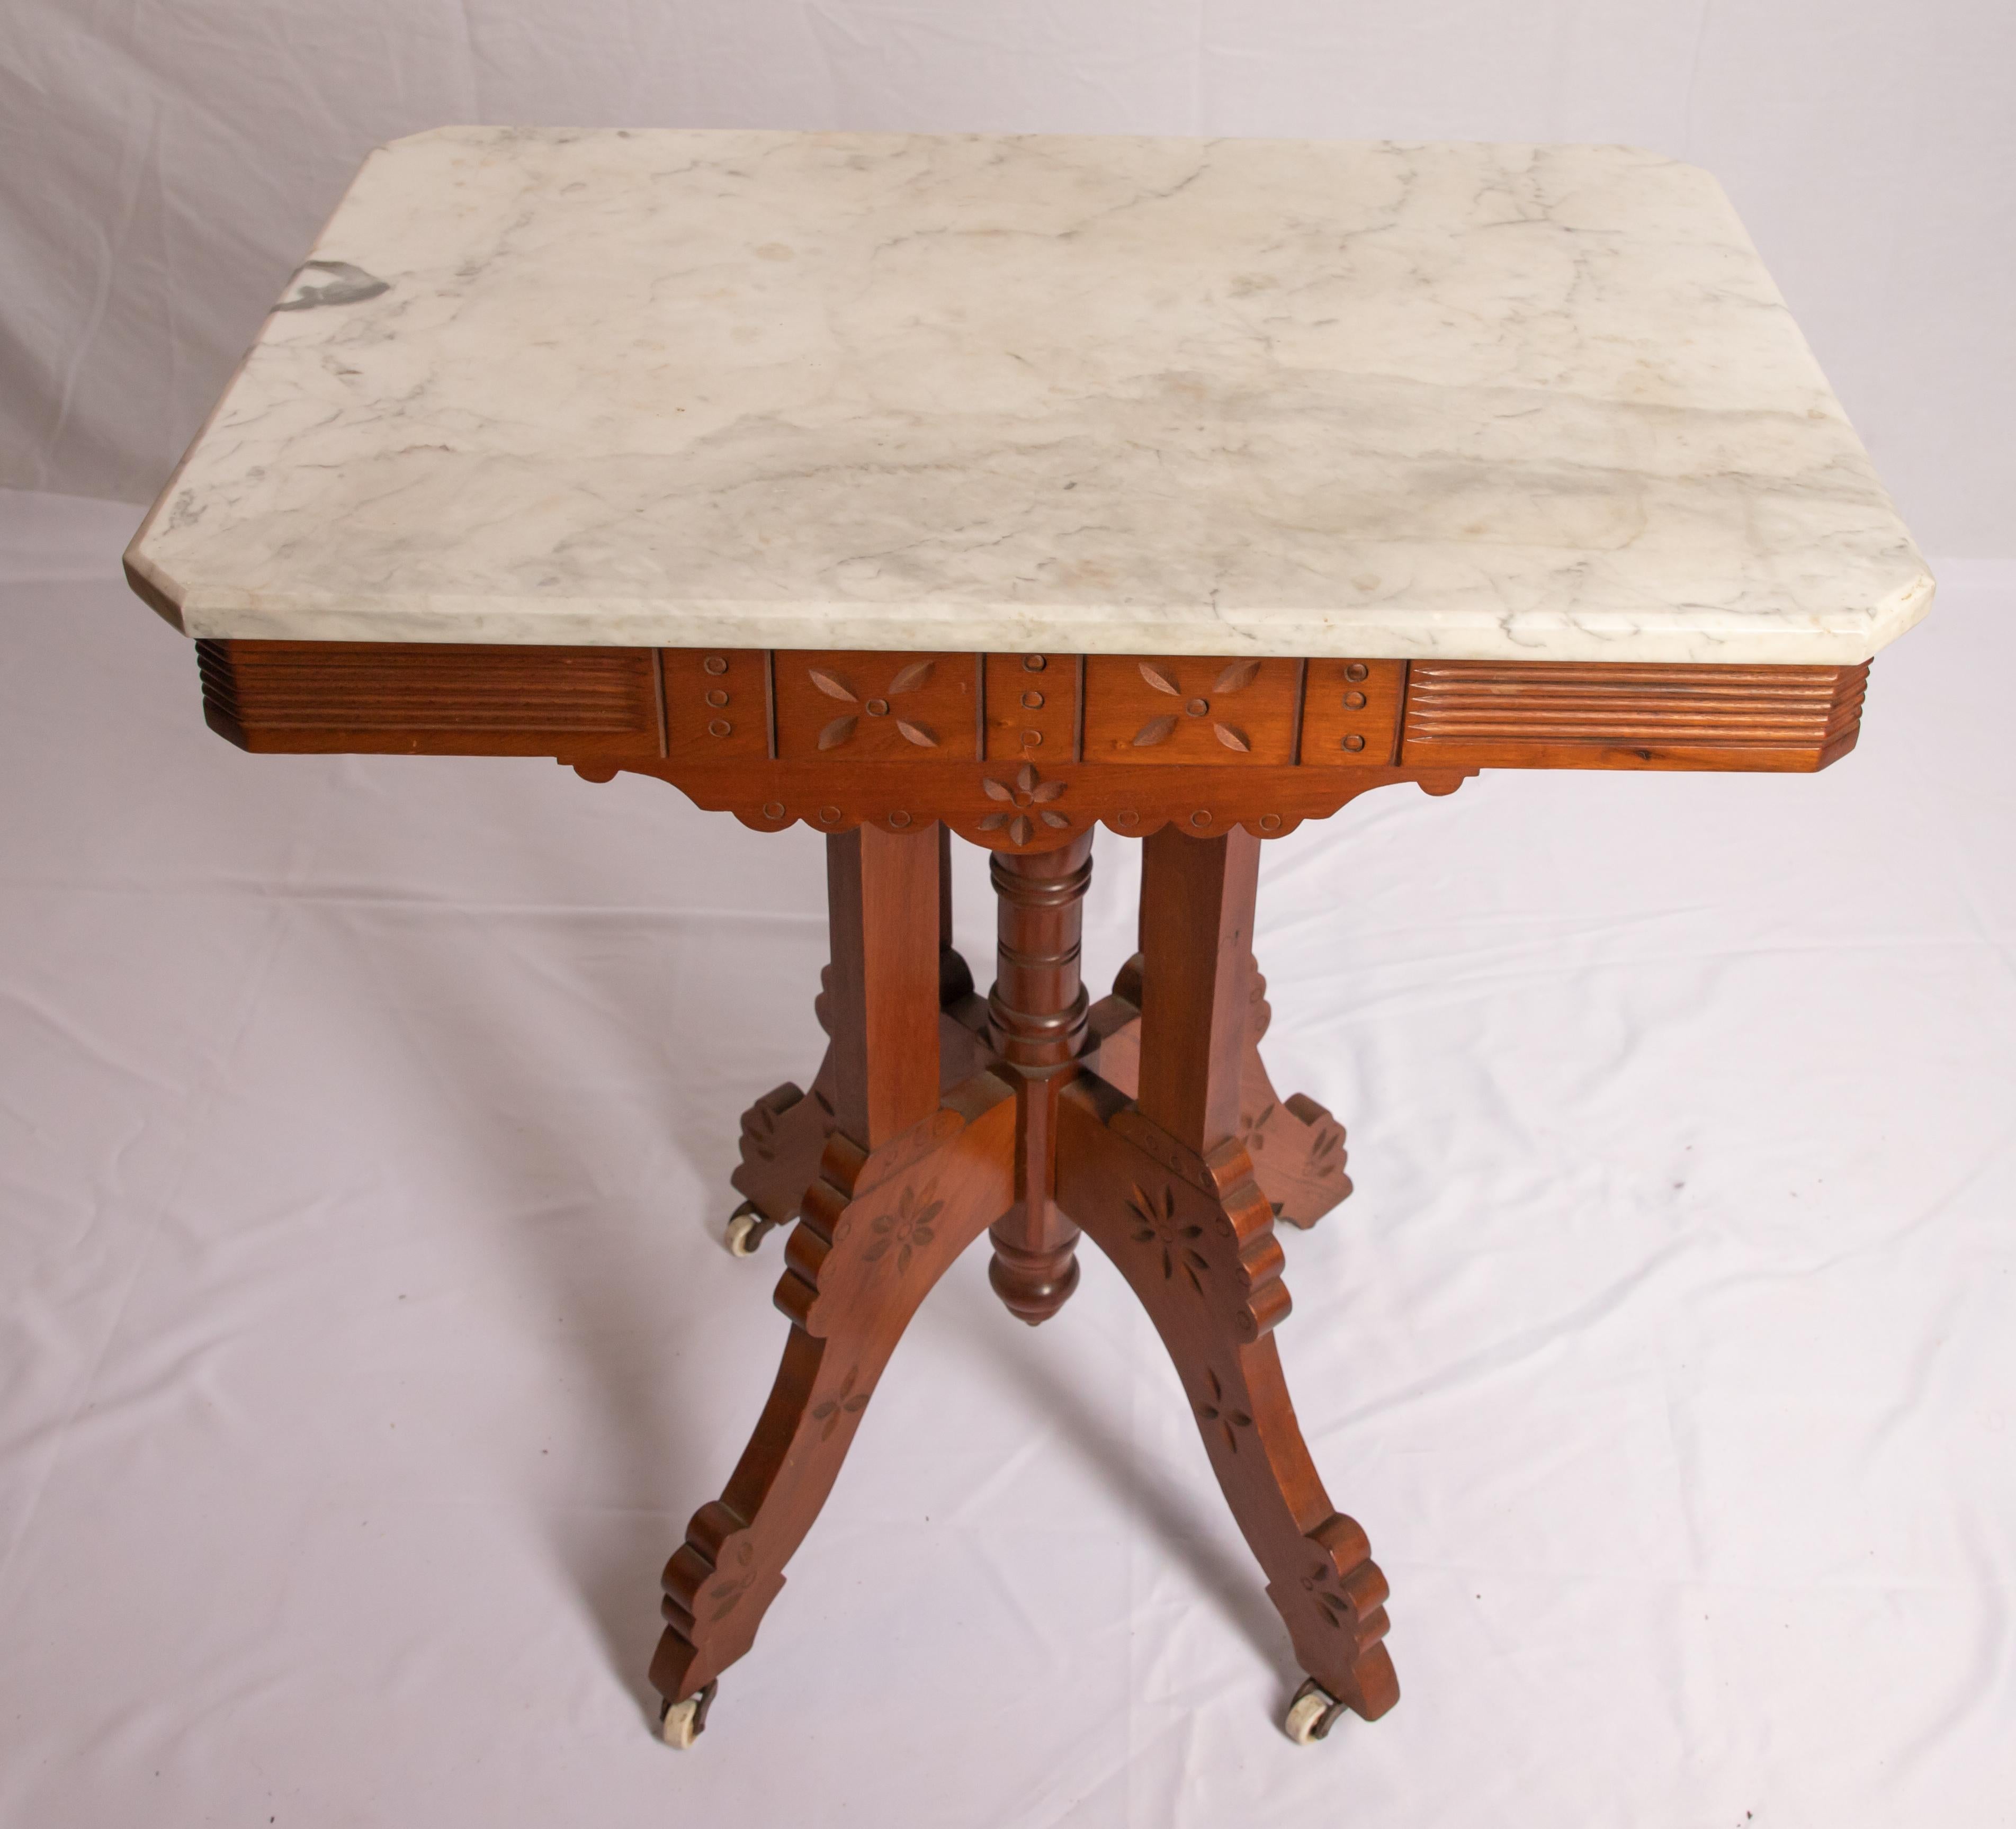 Offering this stunning Eastlake marble-top parlor table. Starting at the bottom on four legs that come to the center having some light floral carving. Rises from there on a center spindle that has four rectangle post around it. The skirt of the